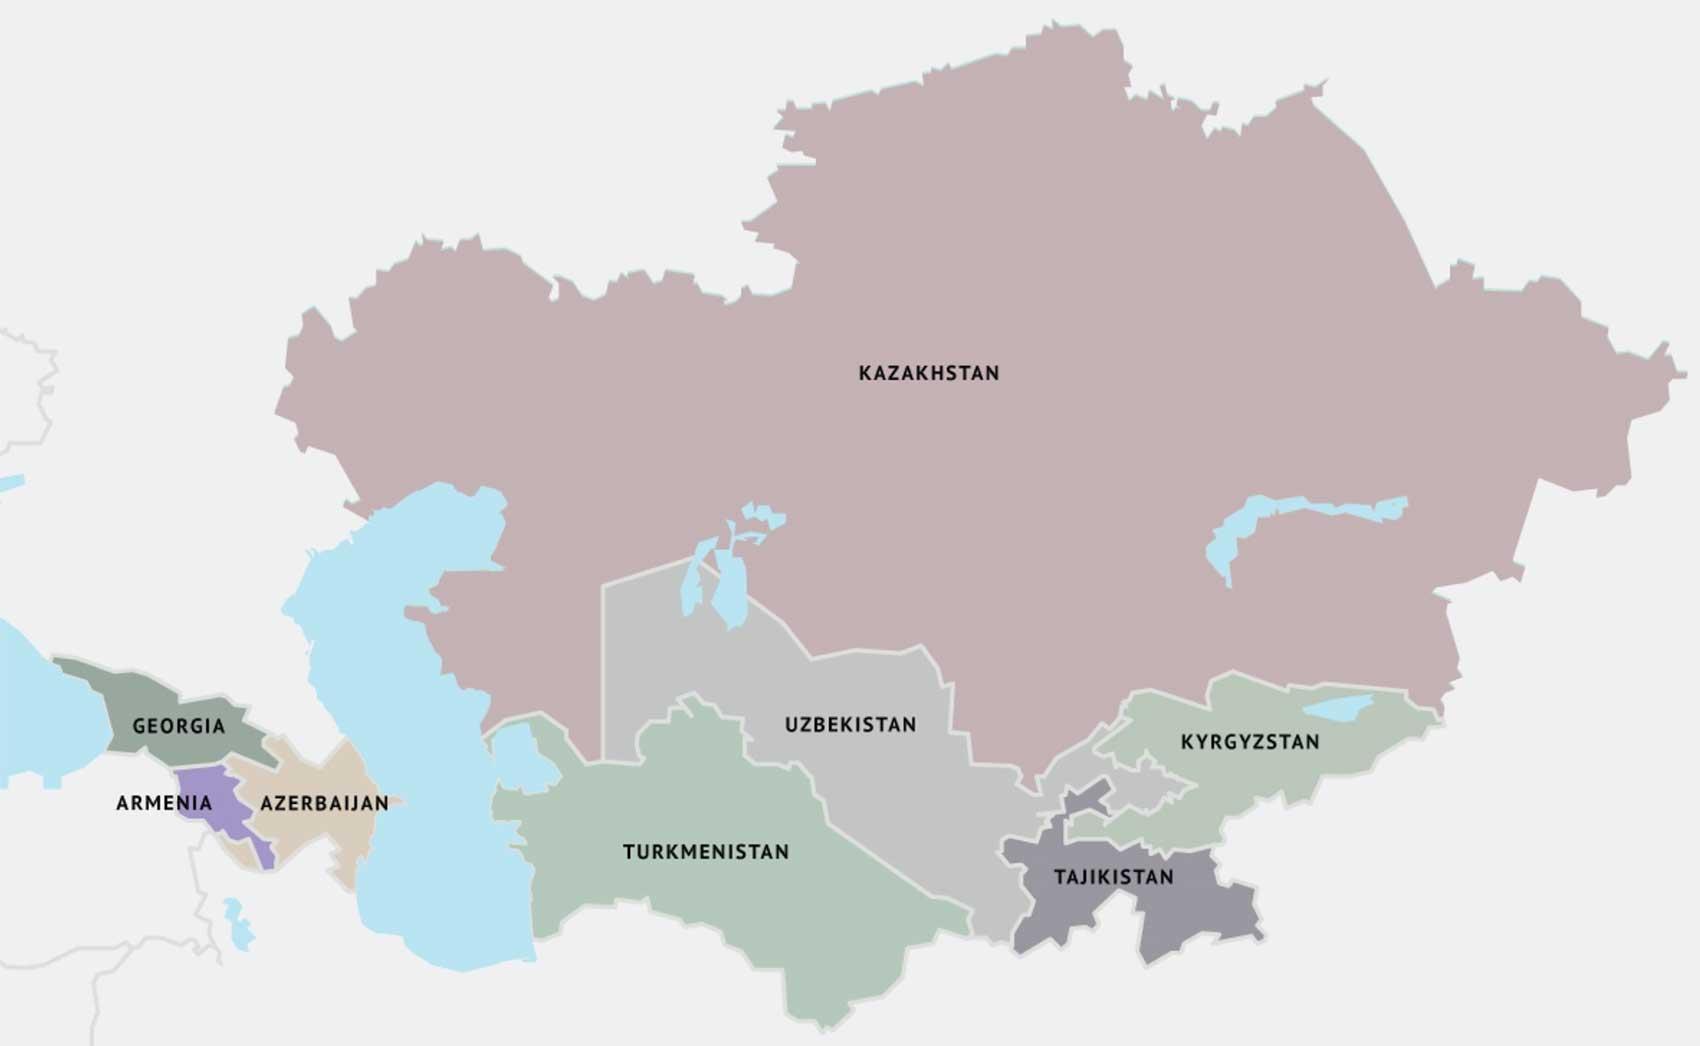 Map of Central Asia and Caspian region